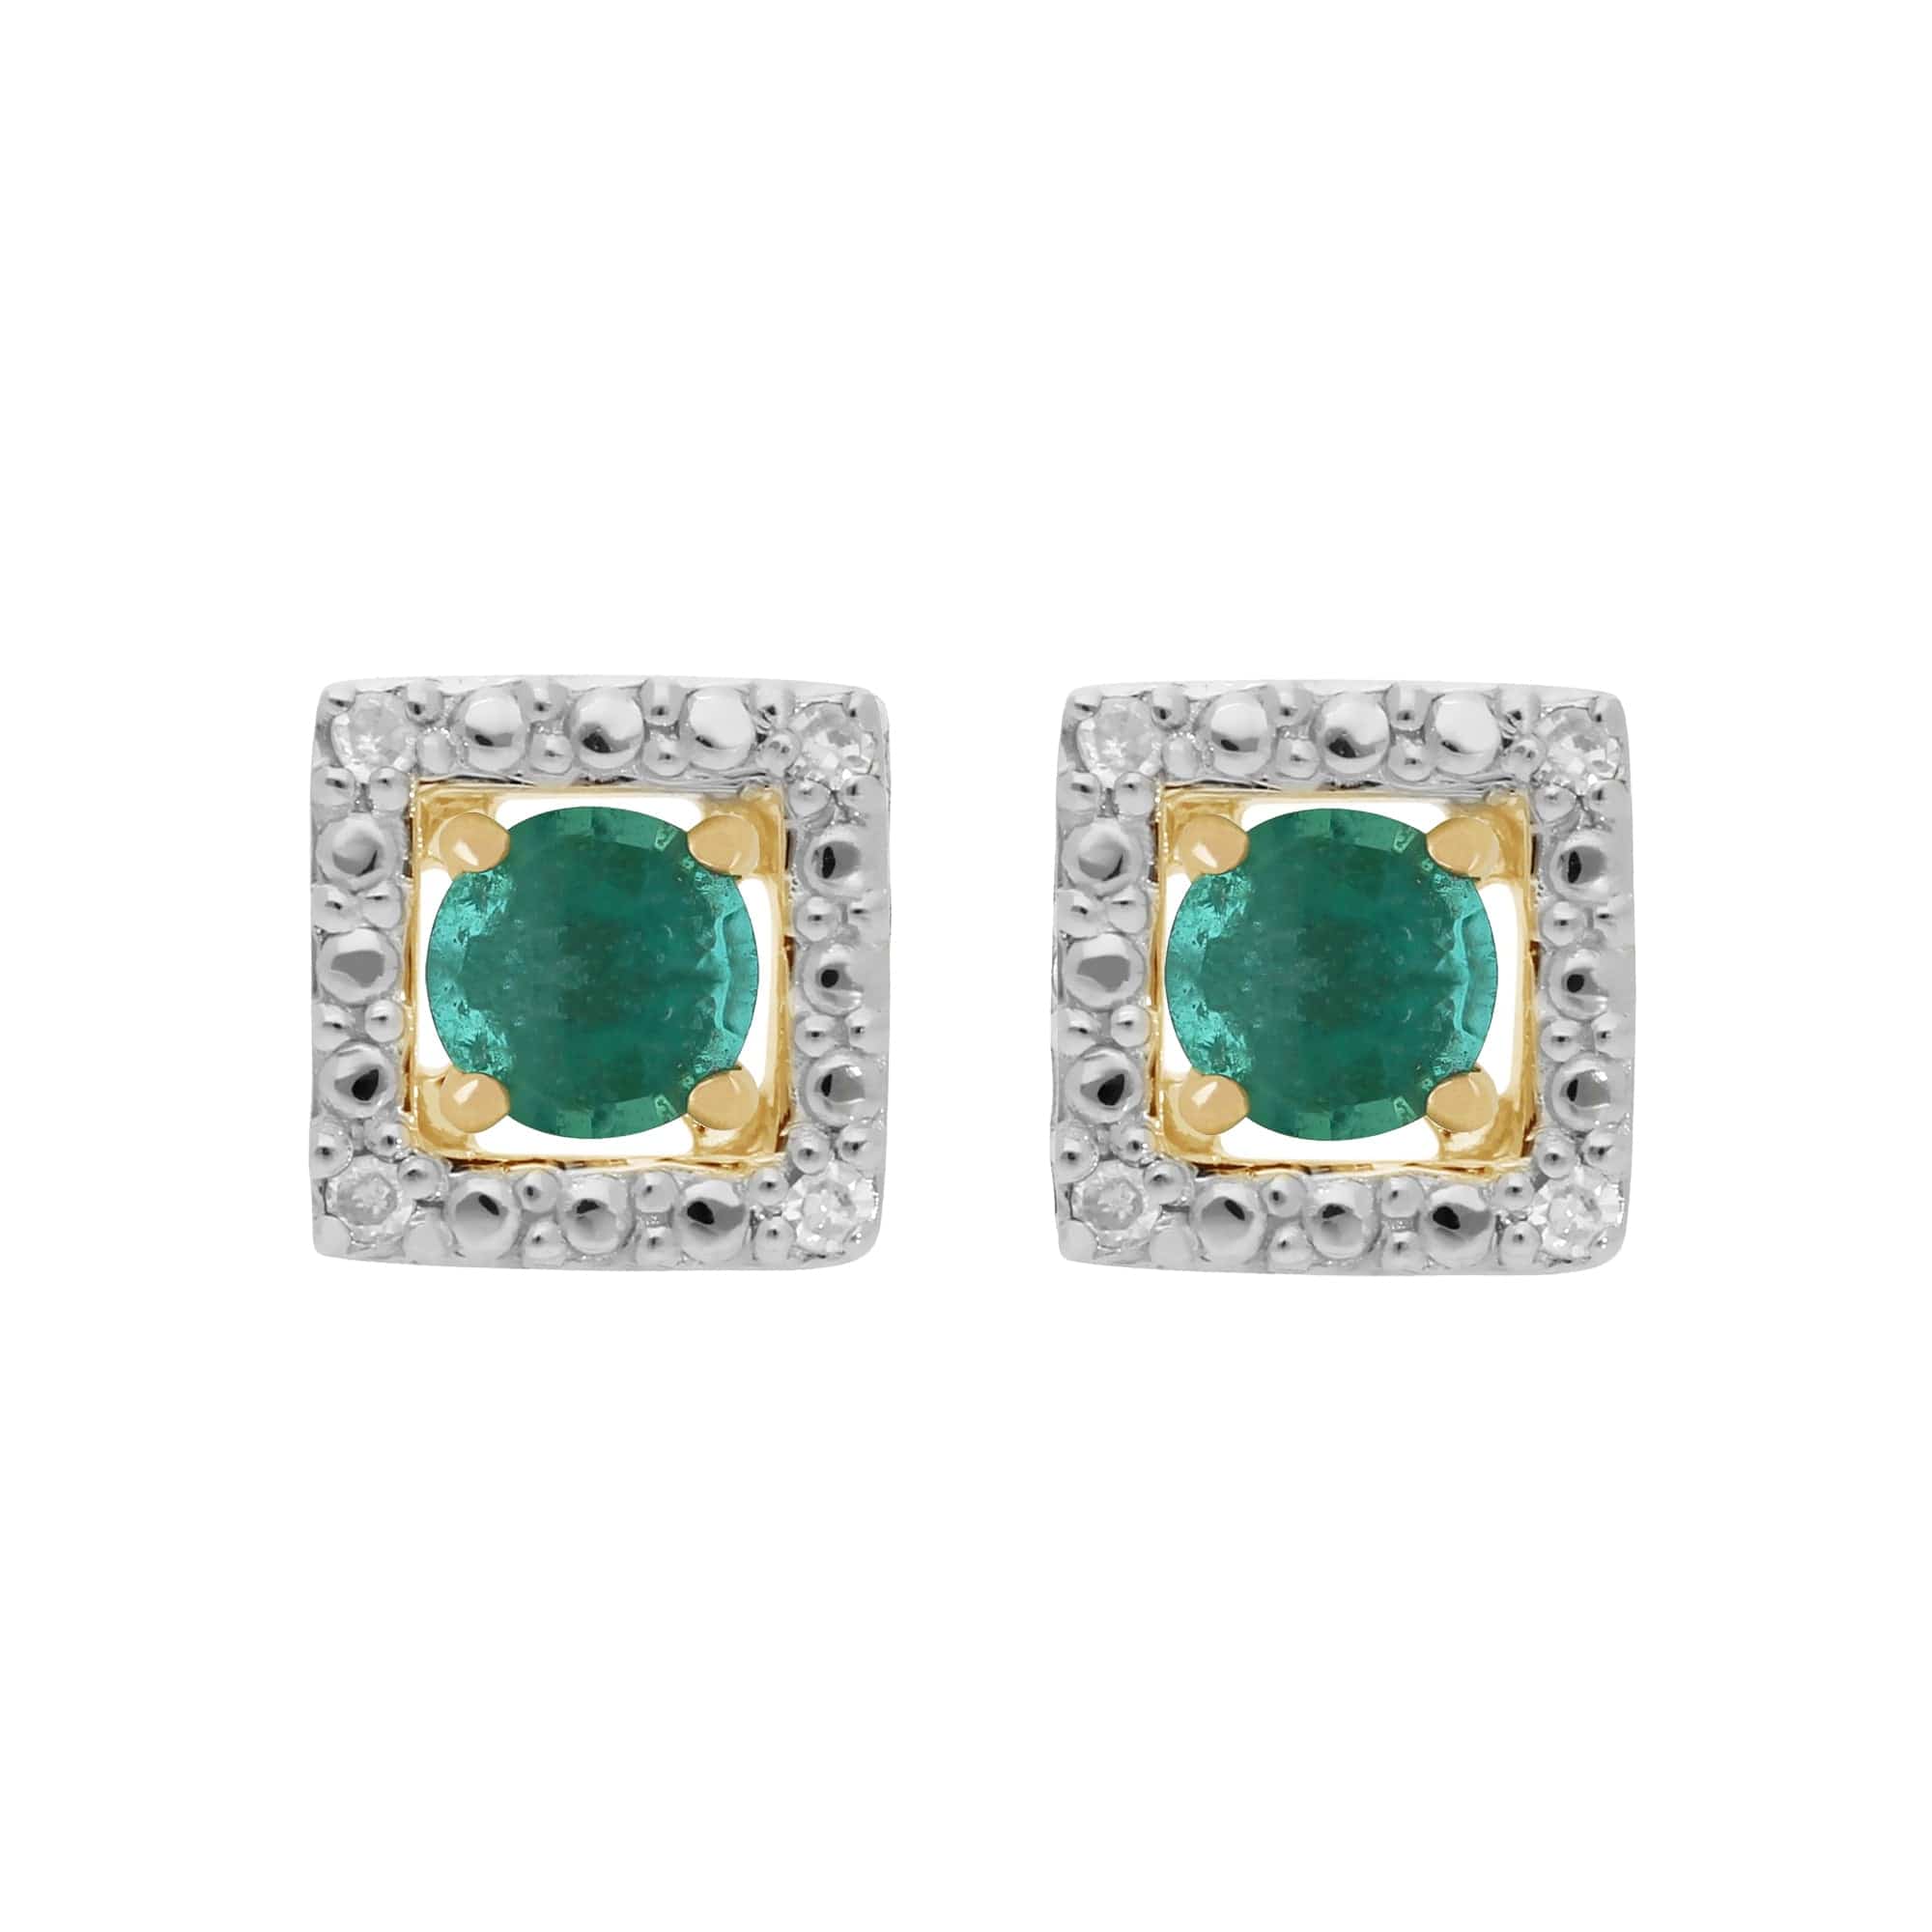 11569-191E0379019 Classic Round Emerald Stud Earrings with Detachable Diamond Square Earrings Jacket Set in 9ct Yellow Gold 1